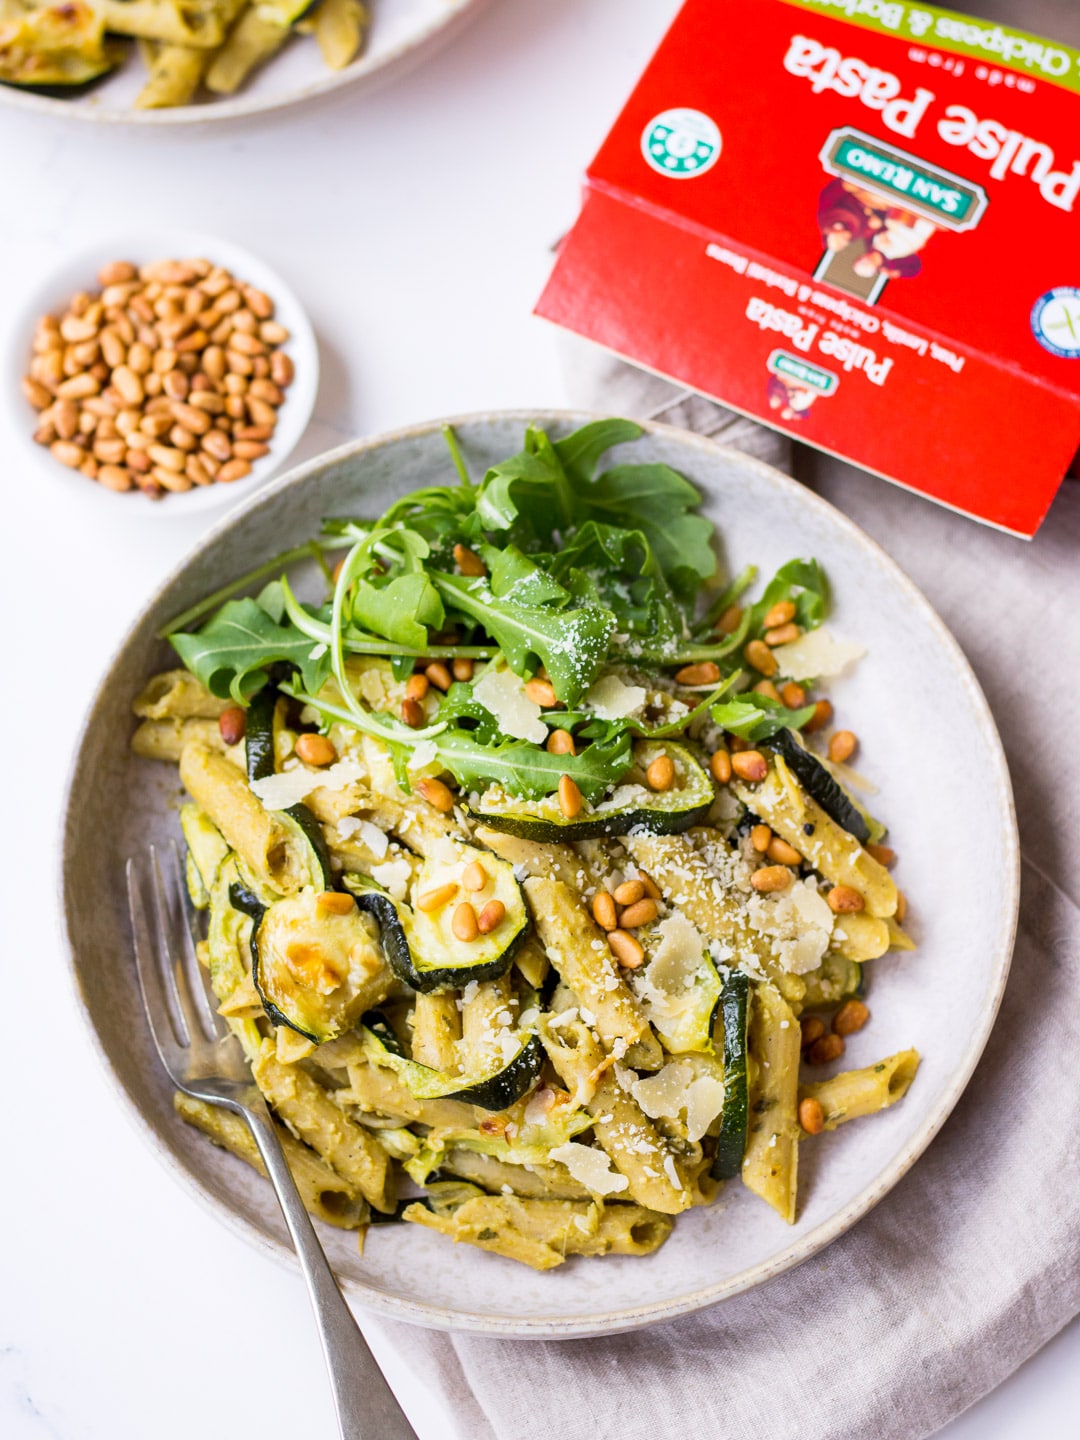 Pesto Pulse Pasta with Roasted Zucchini served in a grey ceramic bowl, with pine nuts